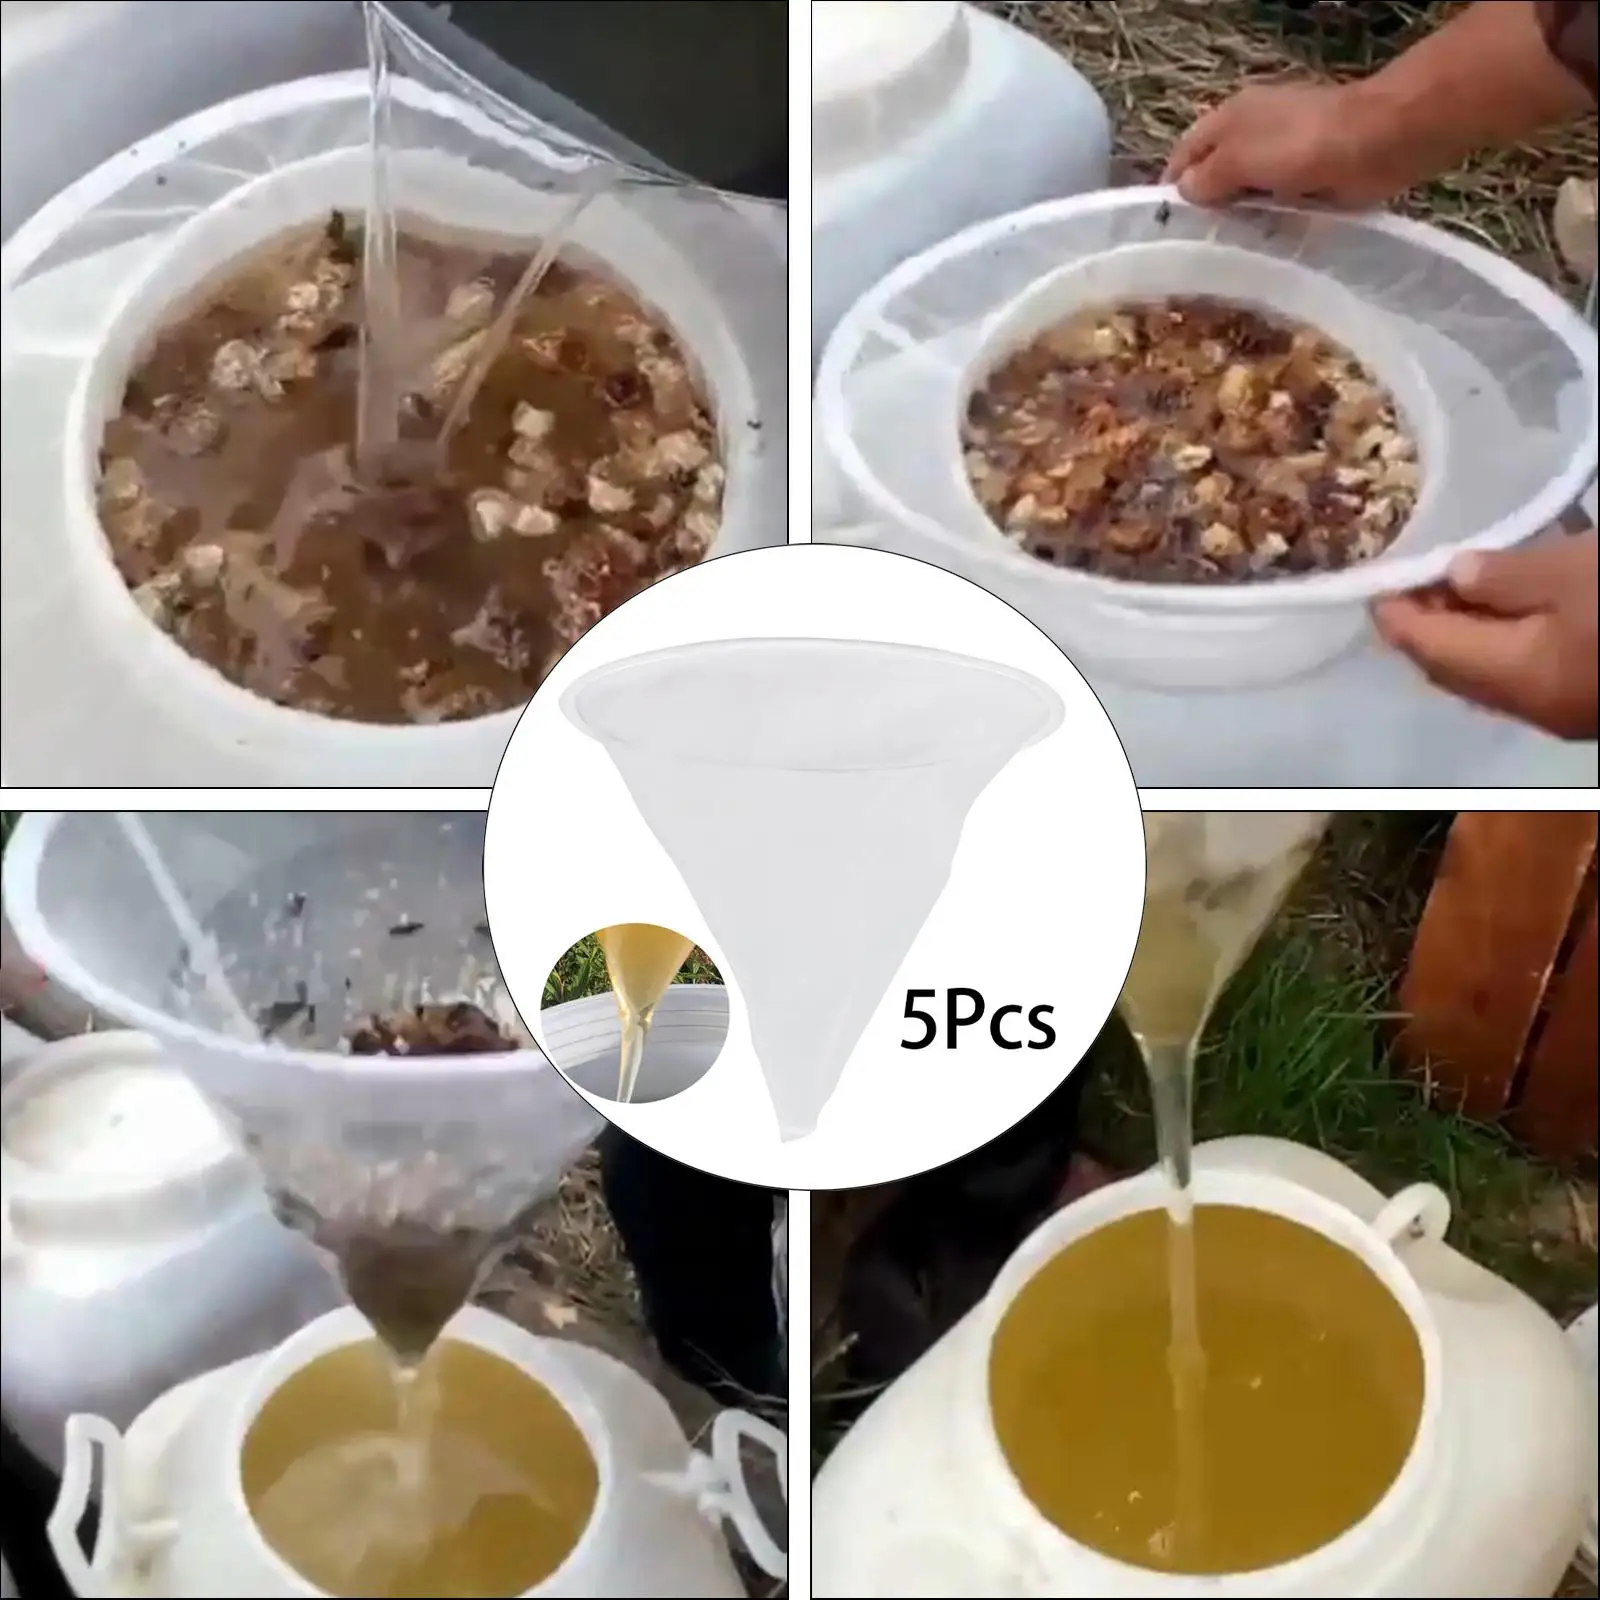 5Pcs Honey Filter Bag Food Grade Kitchen Funnel Shaped Extraction Tool Honey Filter for Honey Beer 5 Gal Bucket Beekeepers